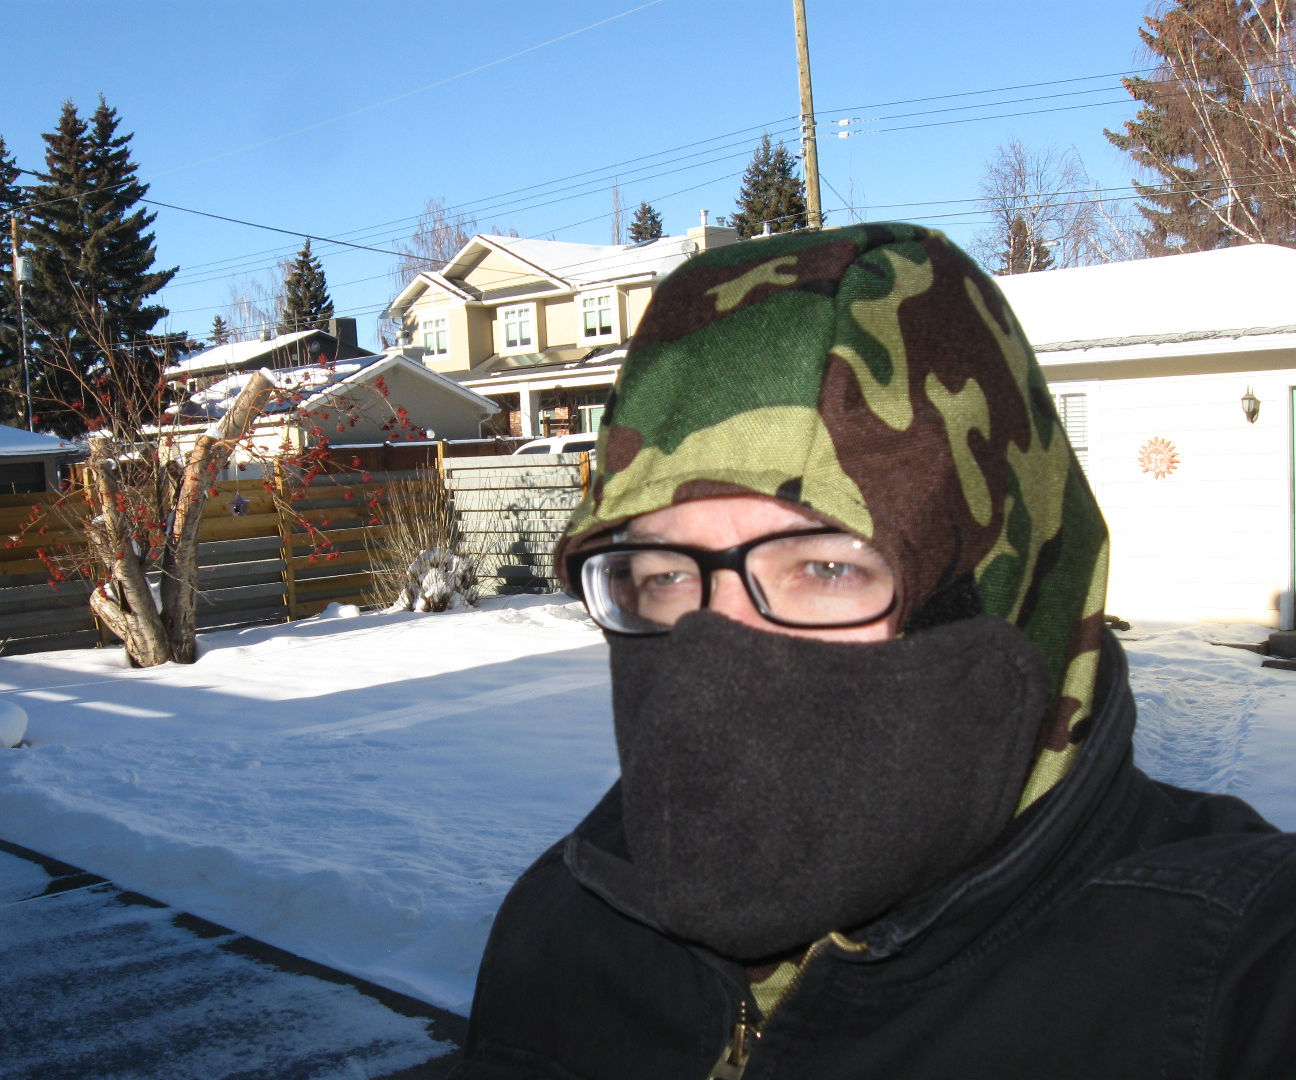 Warm winter hat with no fog facecover